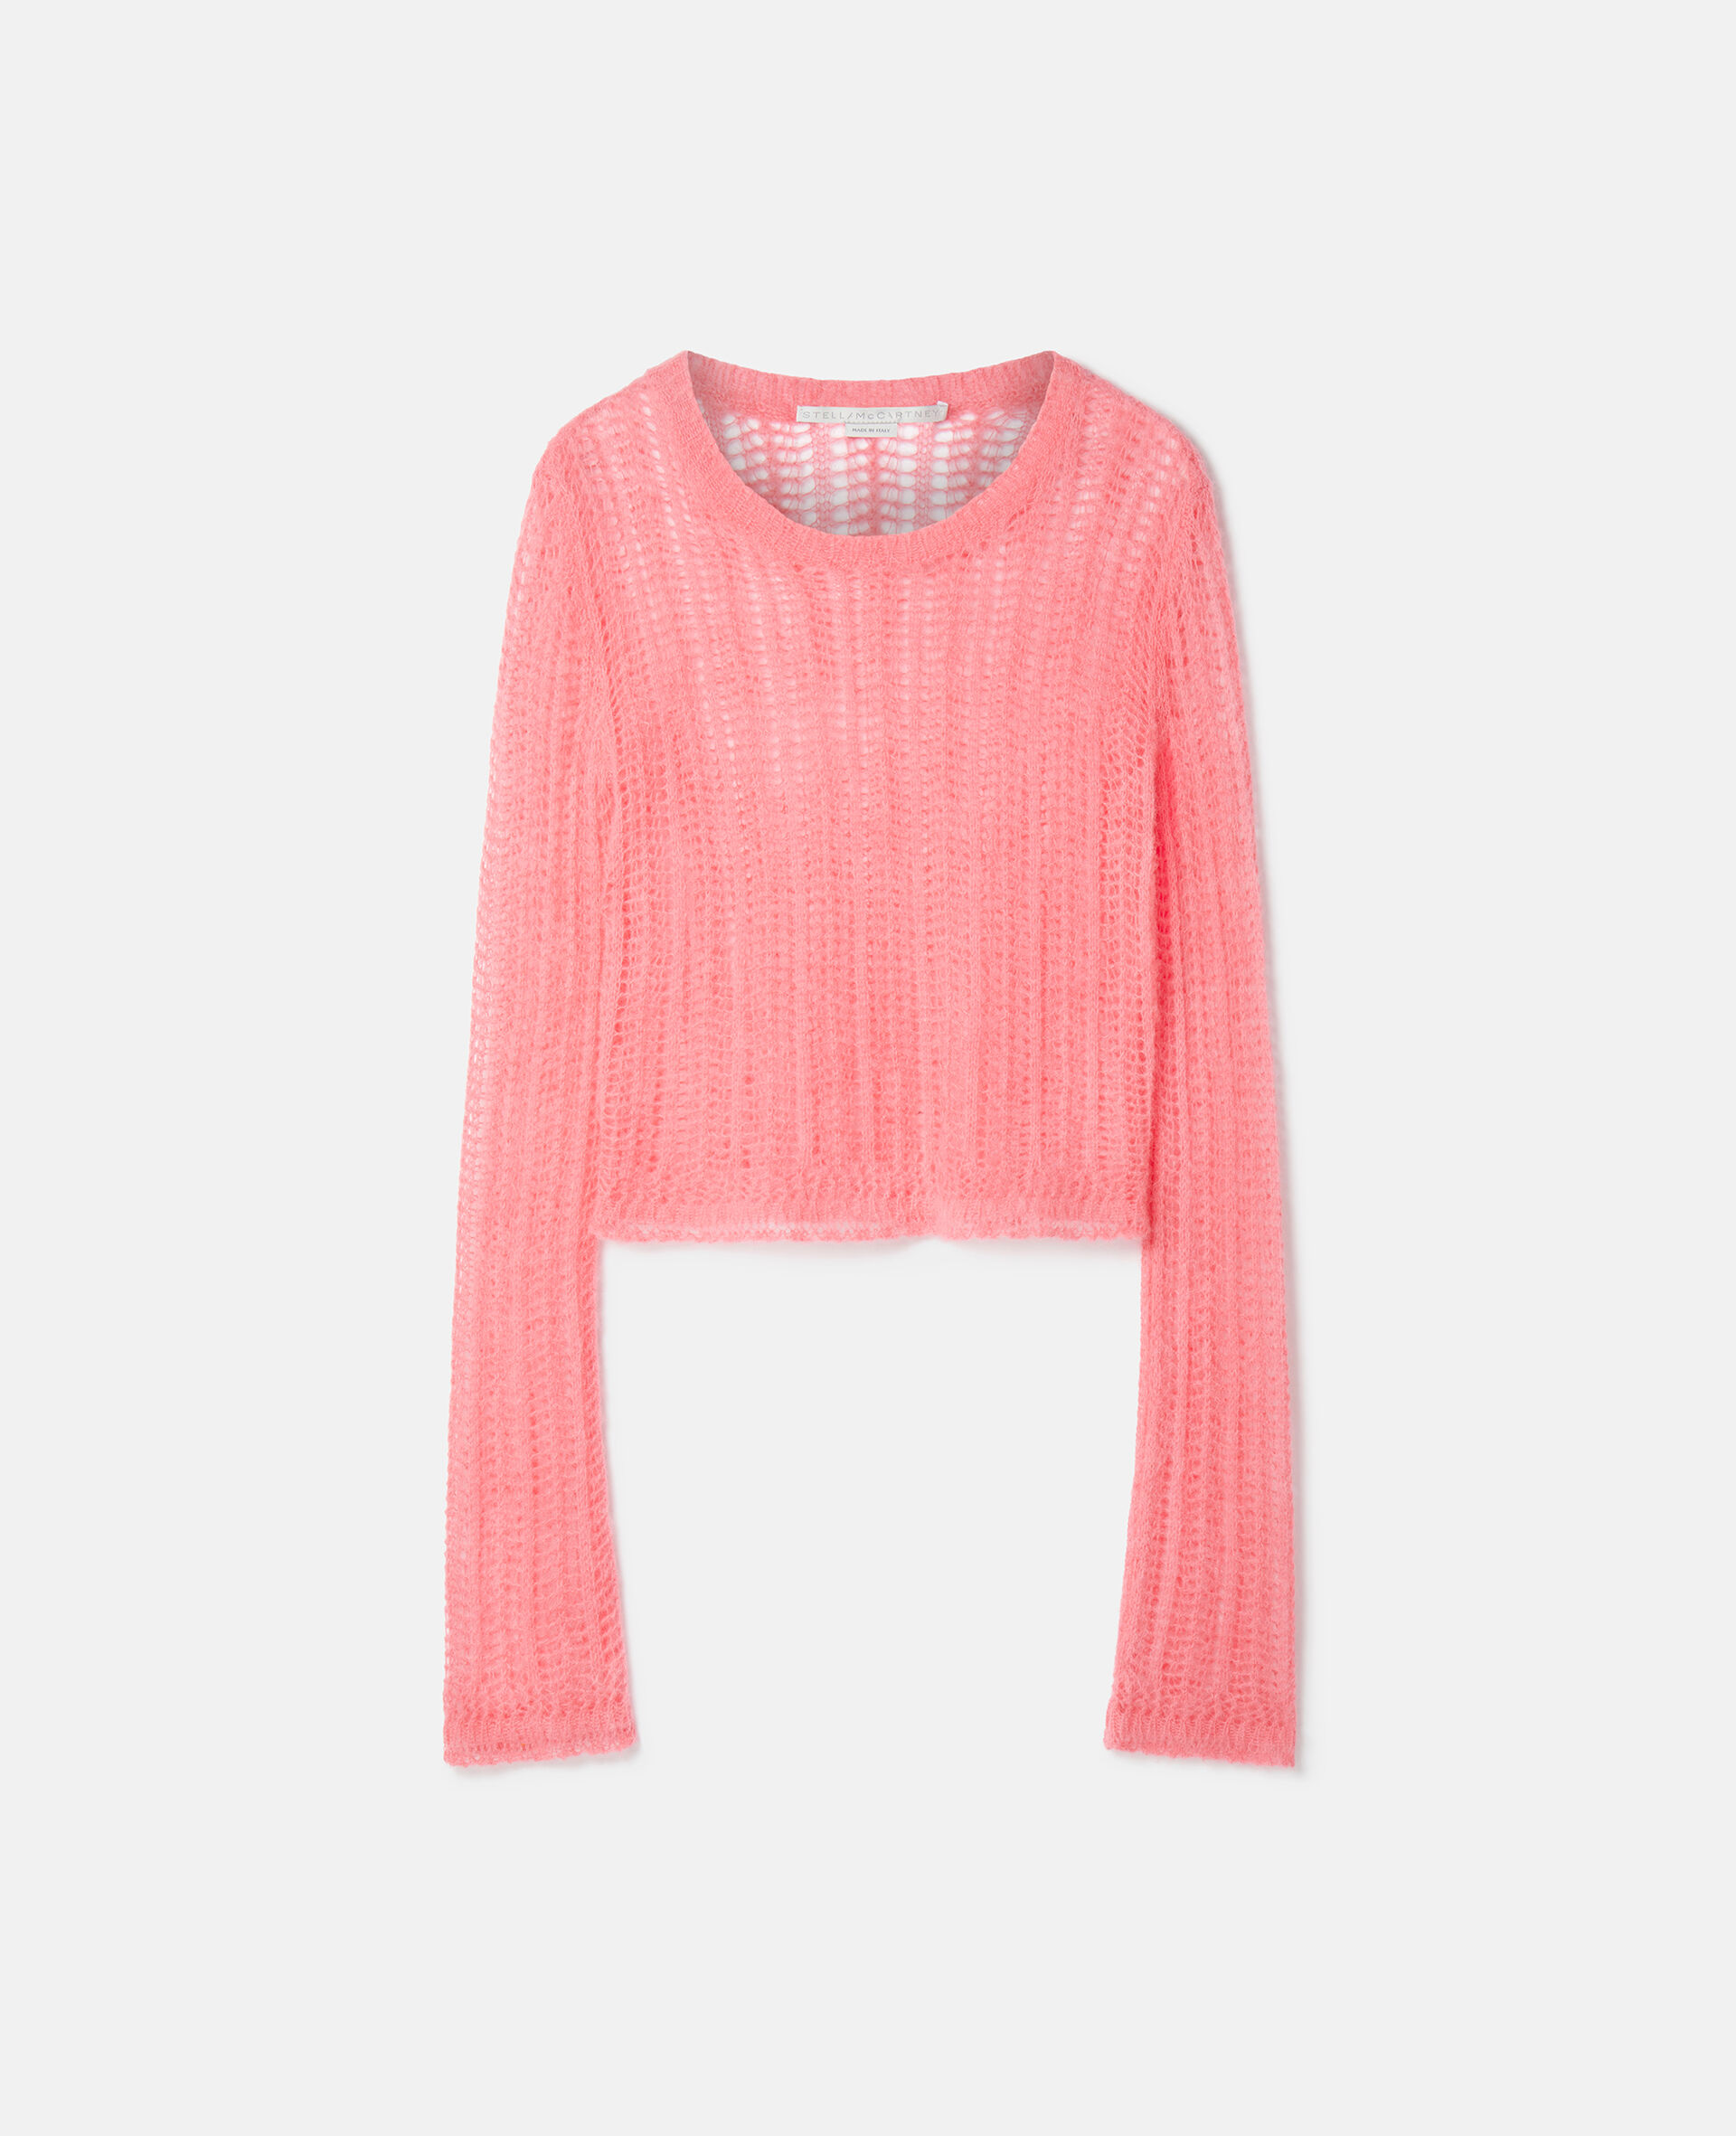 Airy Lace Knit Jumper-Pink-large image number 0